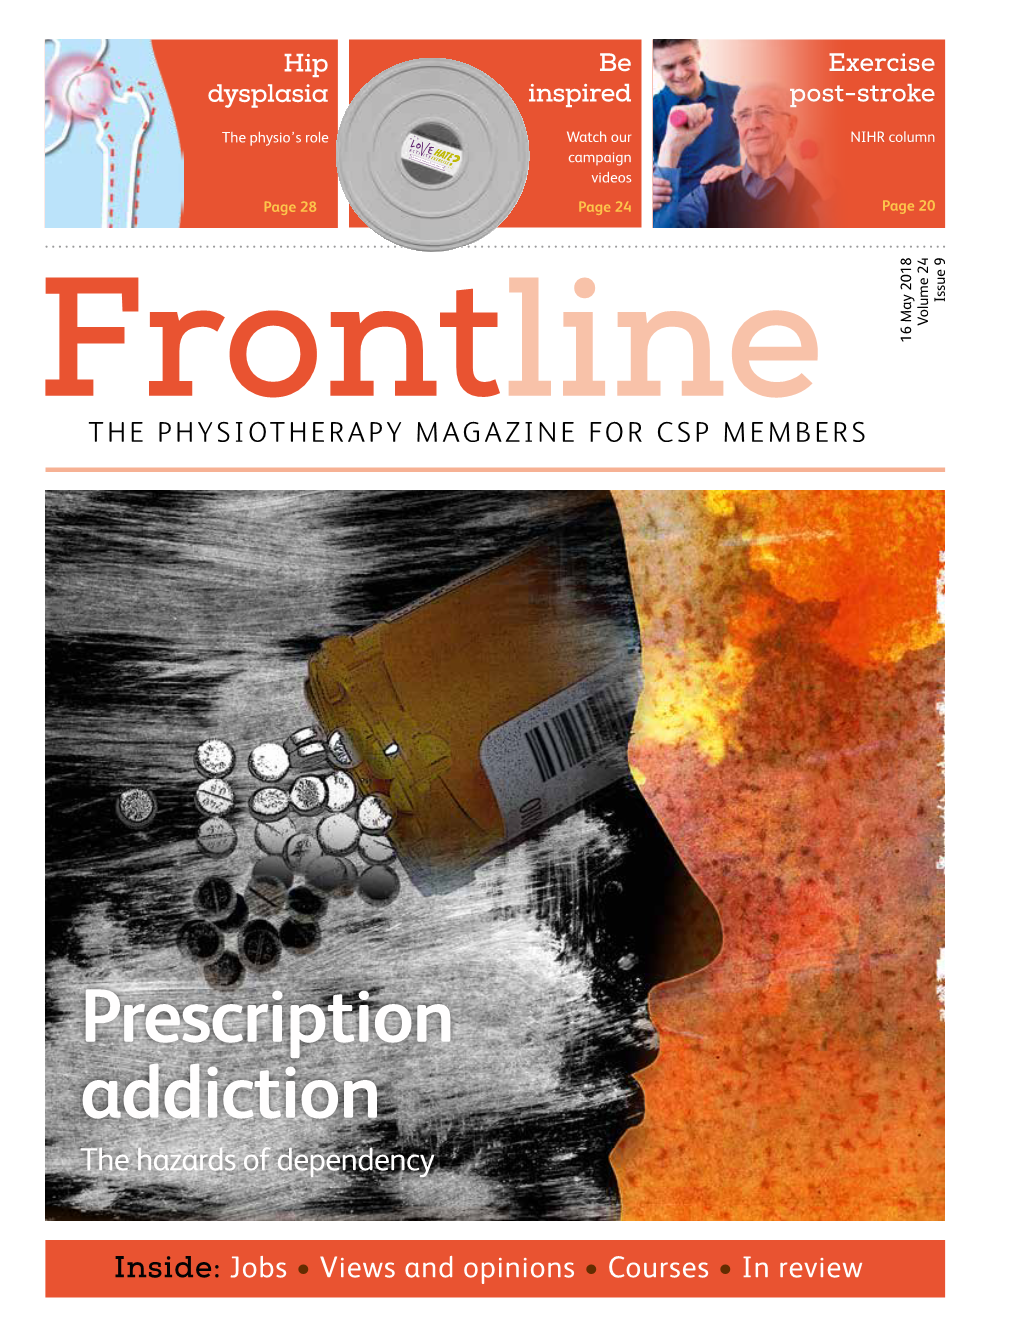 Download Pdf 7.73 MB Frontline 16 May 2018